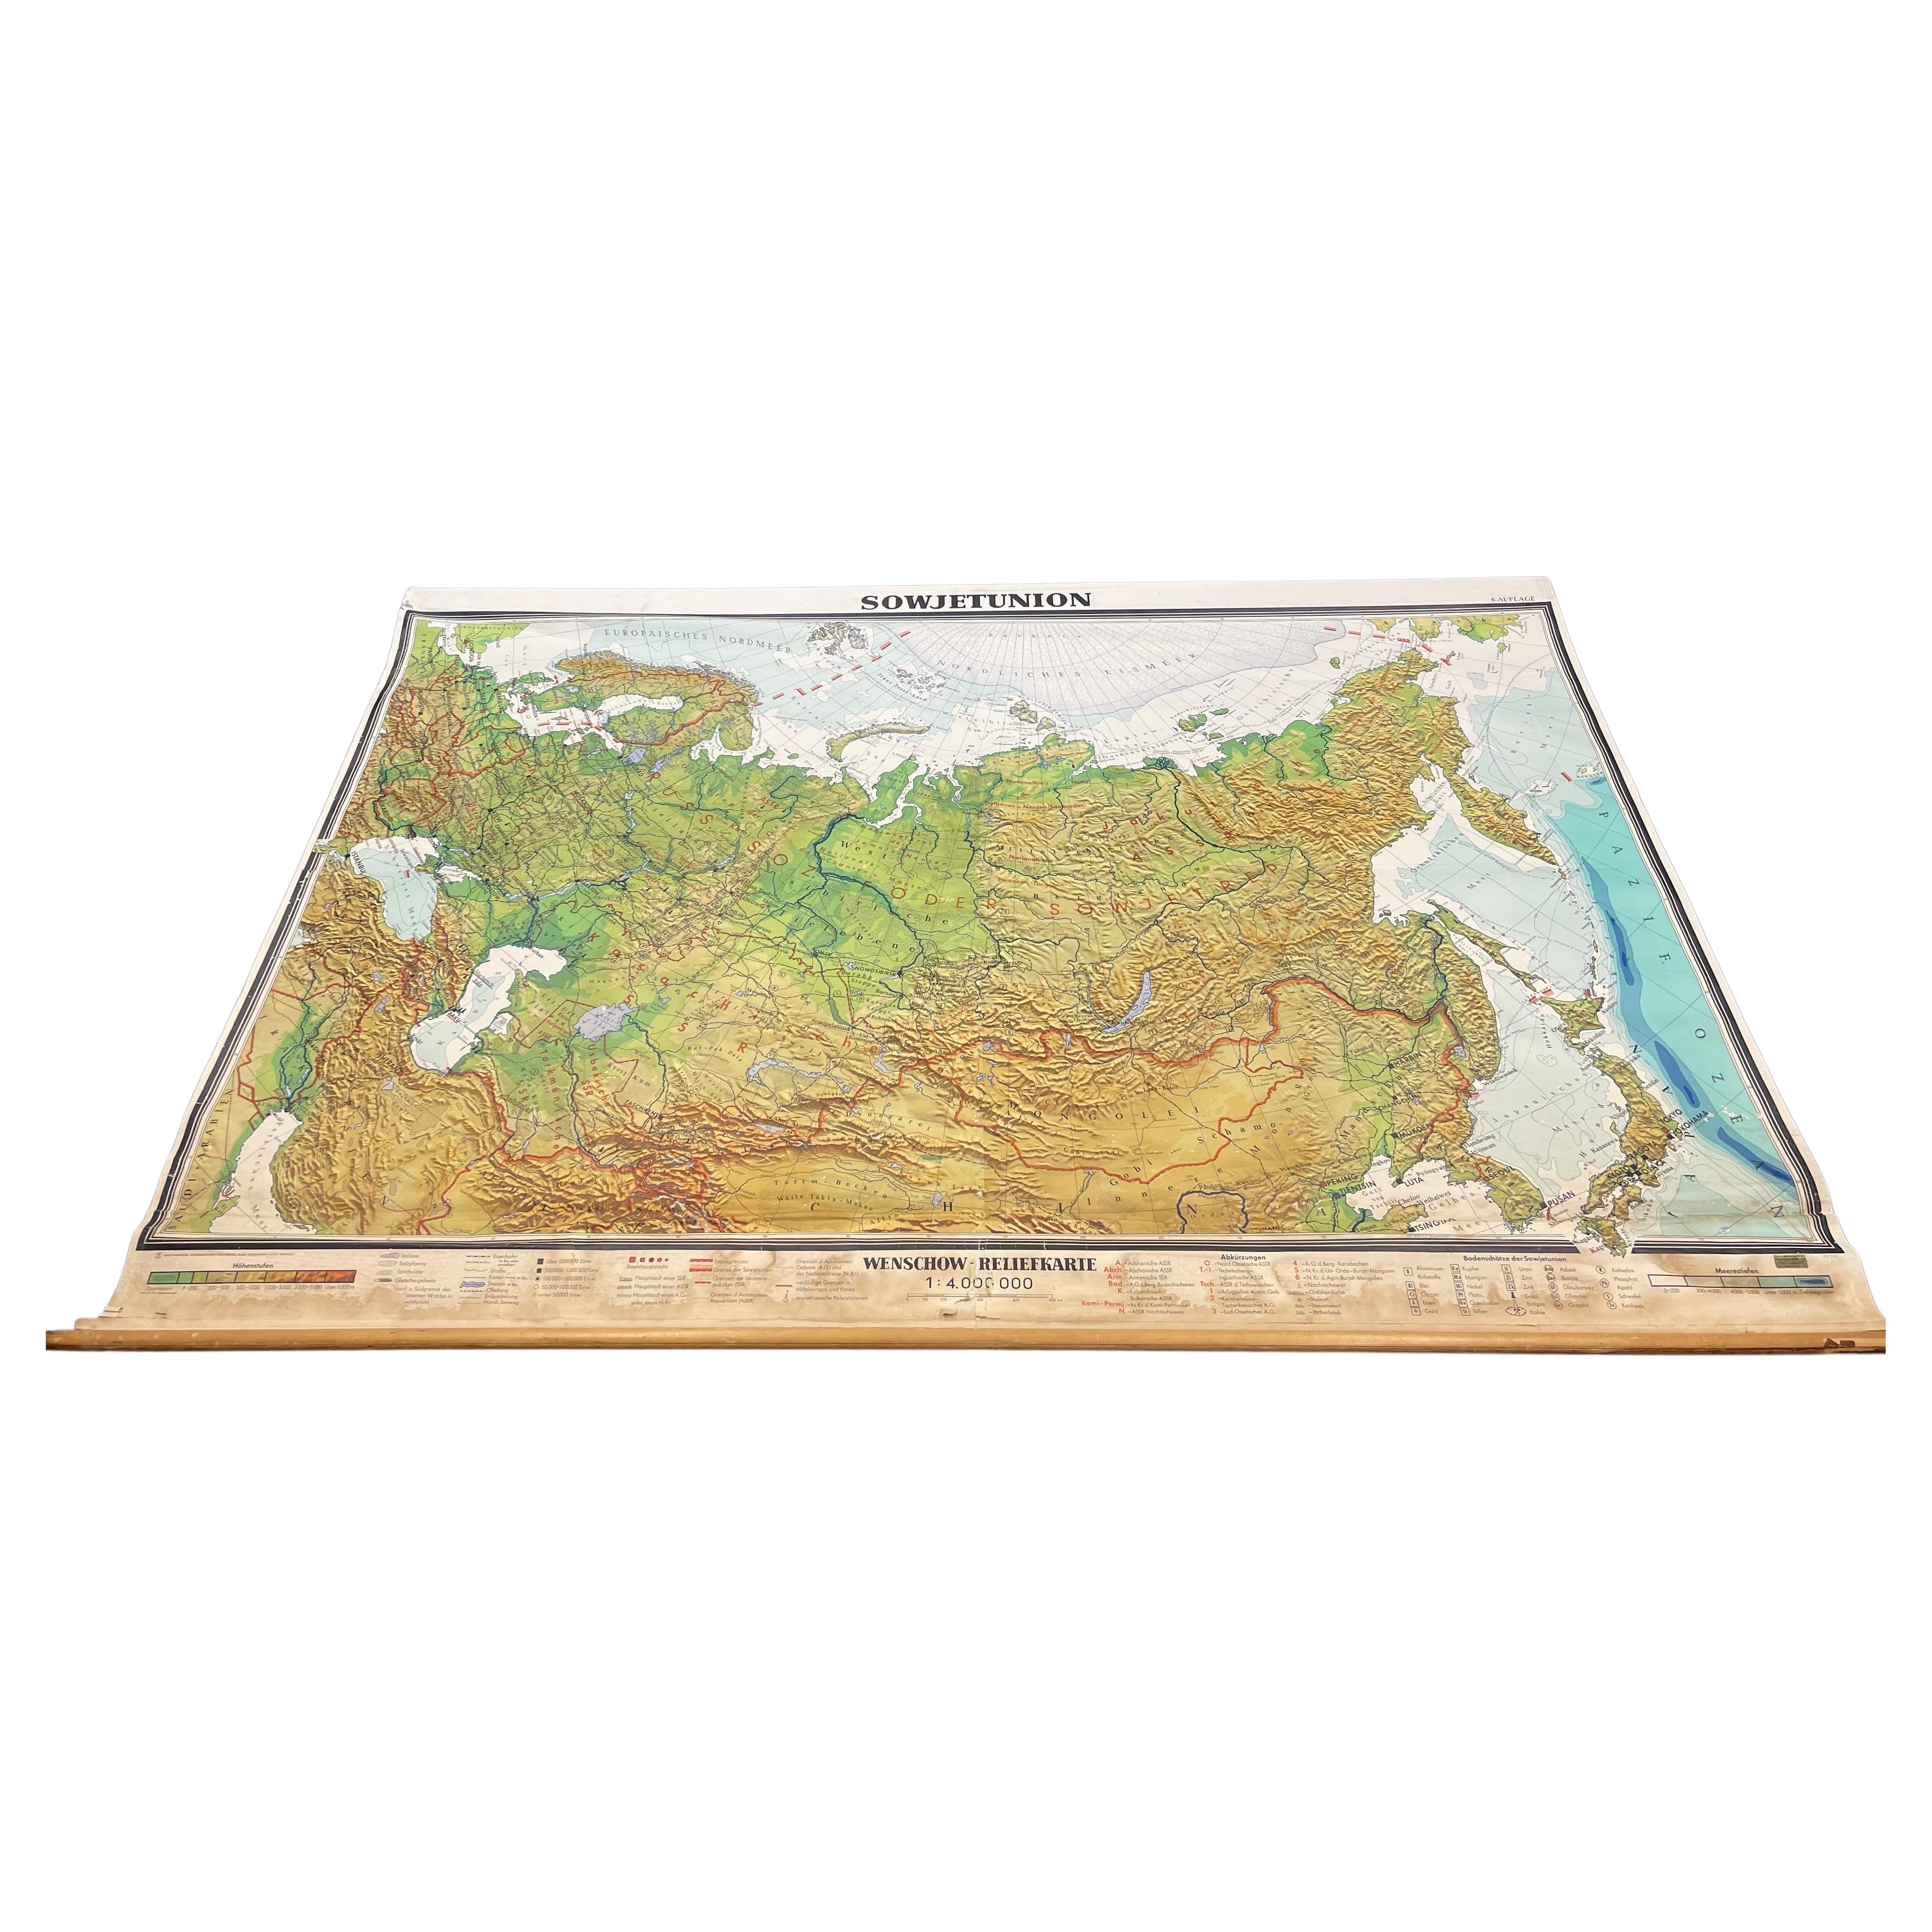 Massive Vintage Wall Map of the Soviet Union 'Sowjetunion' by Karl Wenschow For Sale